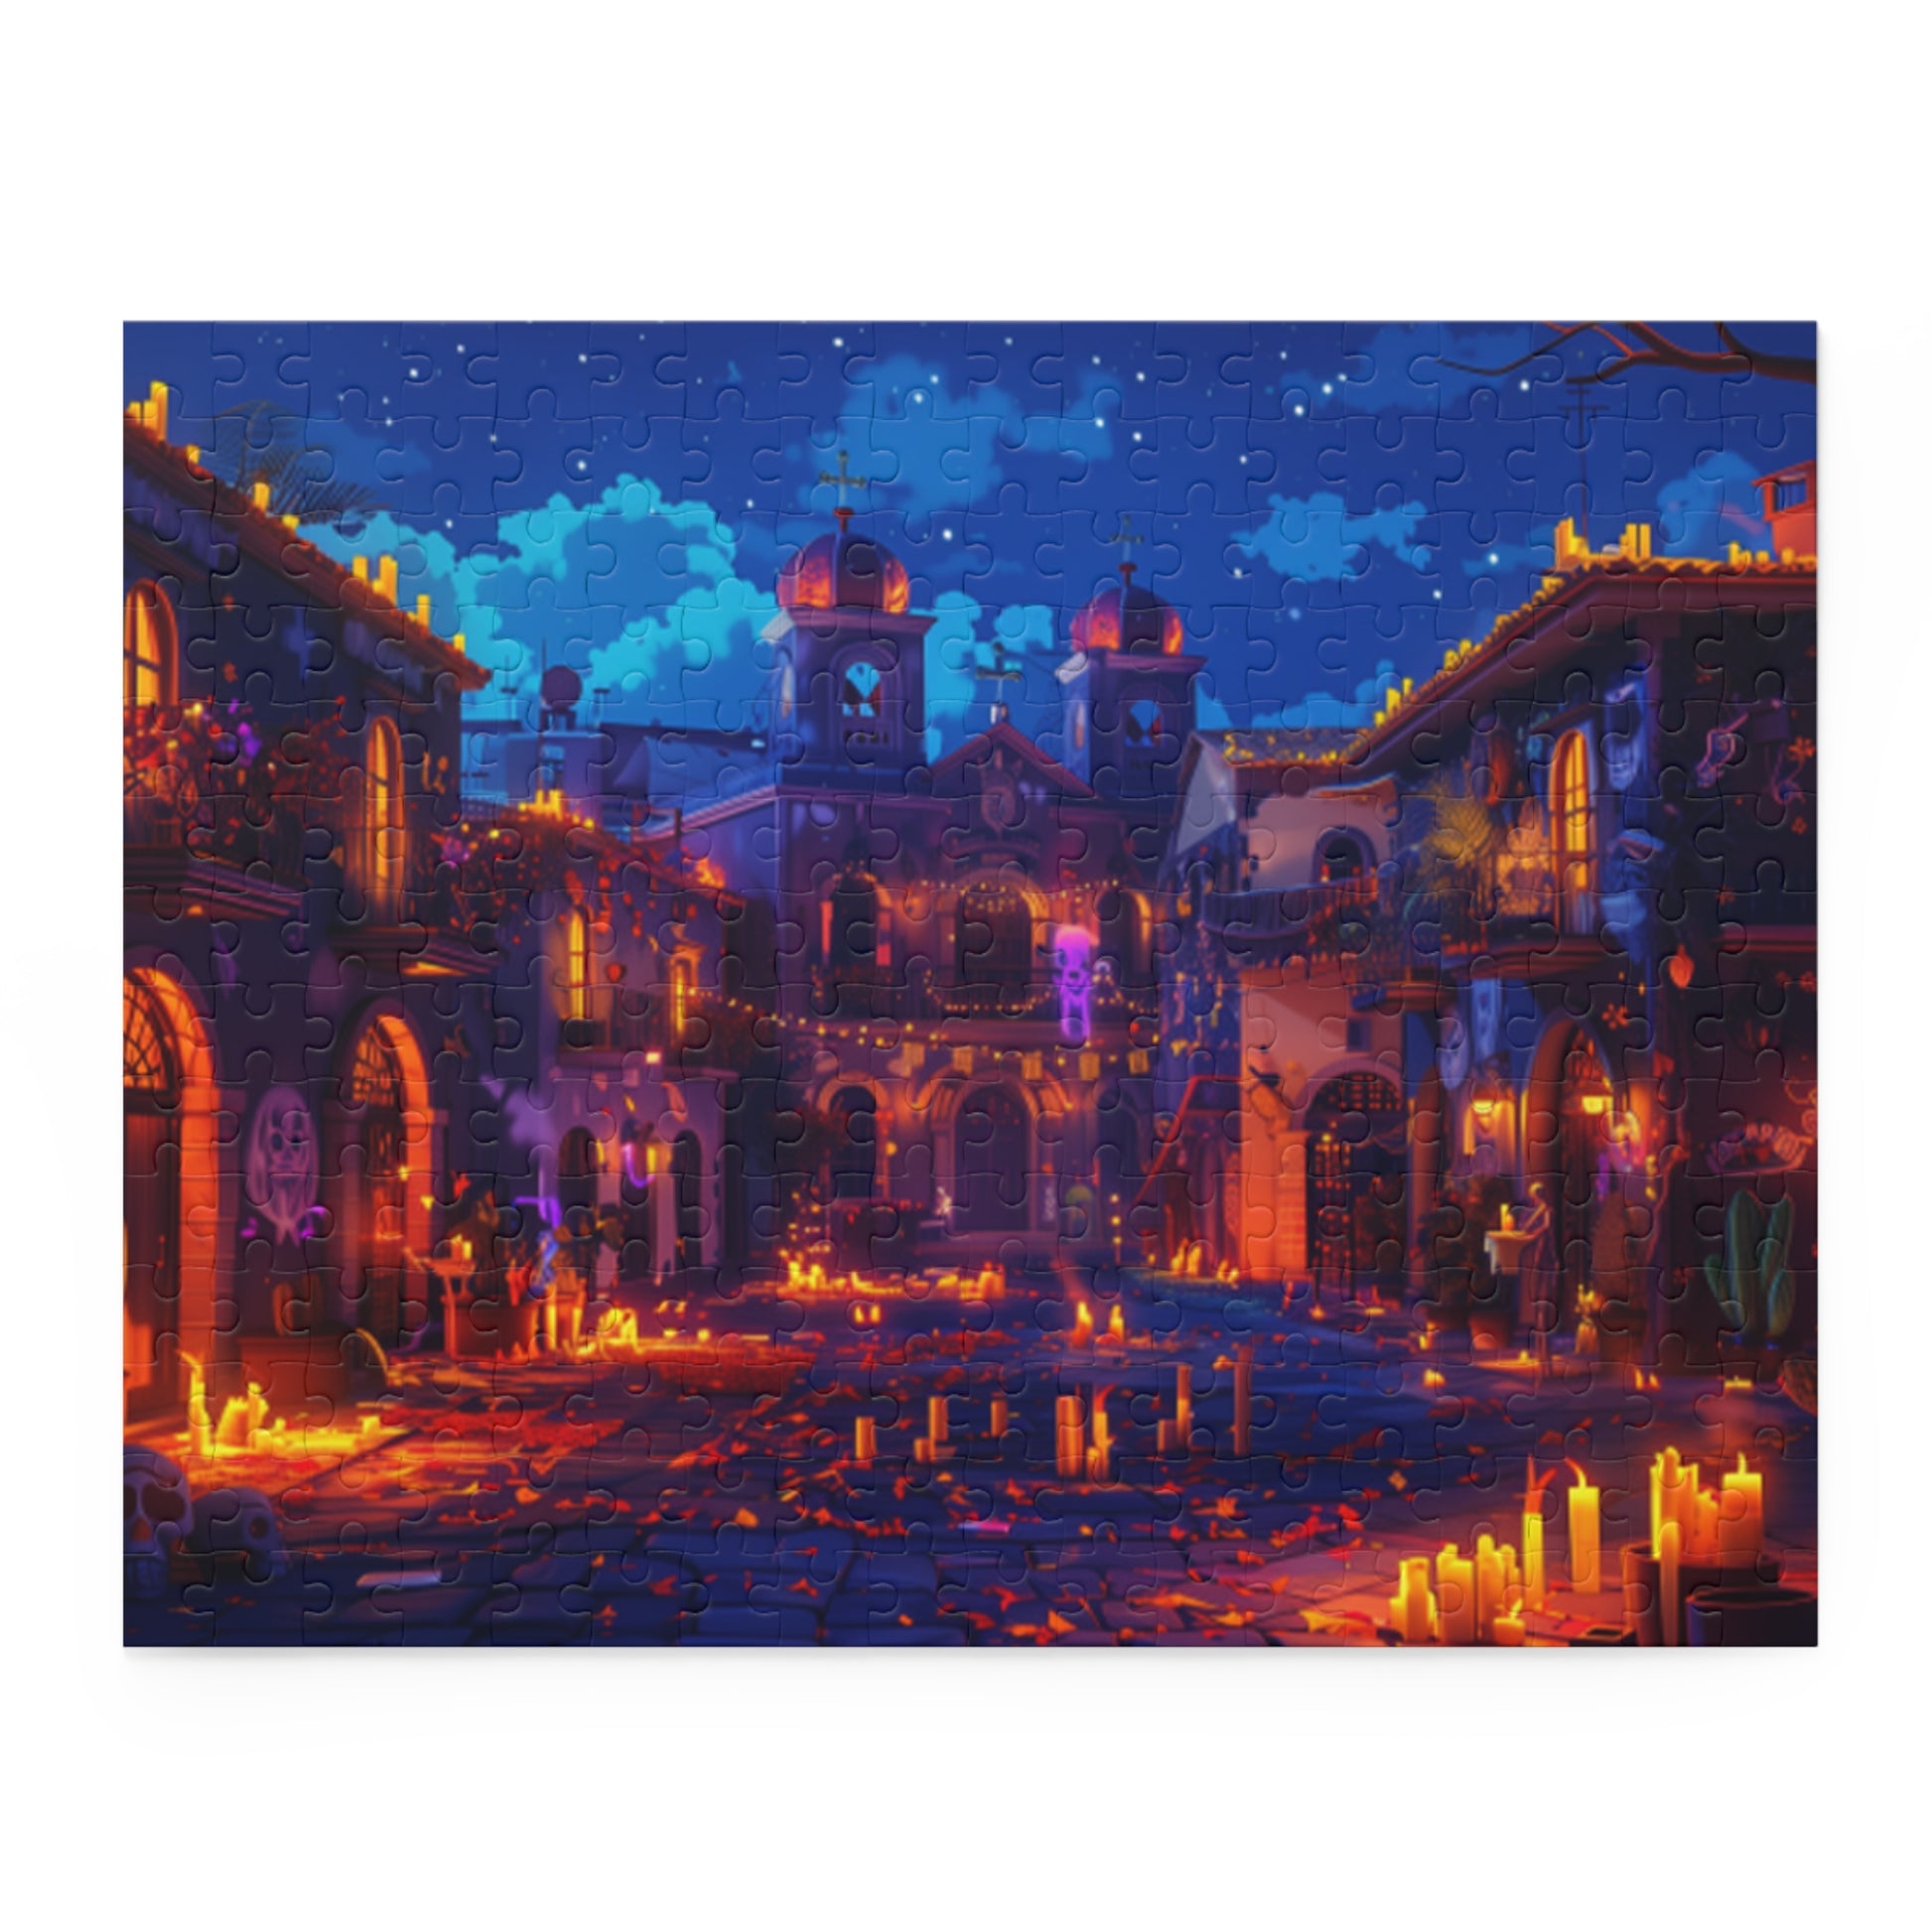 Mexican Art Candle Night Church Retro Jigsaw Puzzle Adult Birthday Business Jigsaw Puzzle Gift for Him Funny Humorous Indoor Outdoor Game Gift For Her Online-3